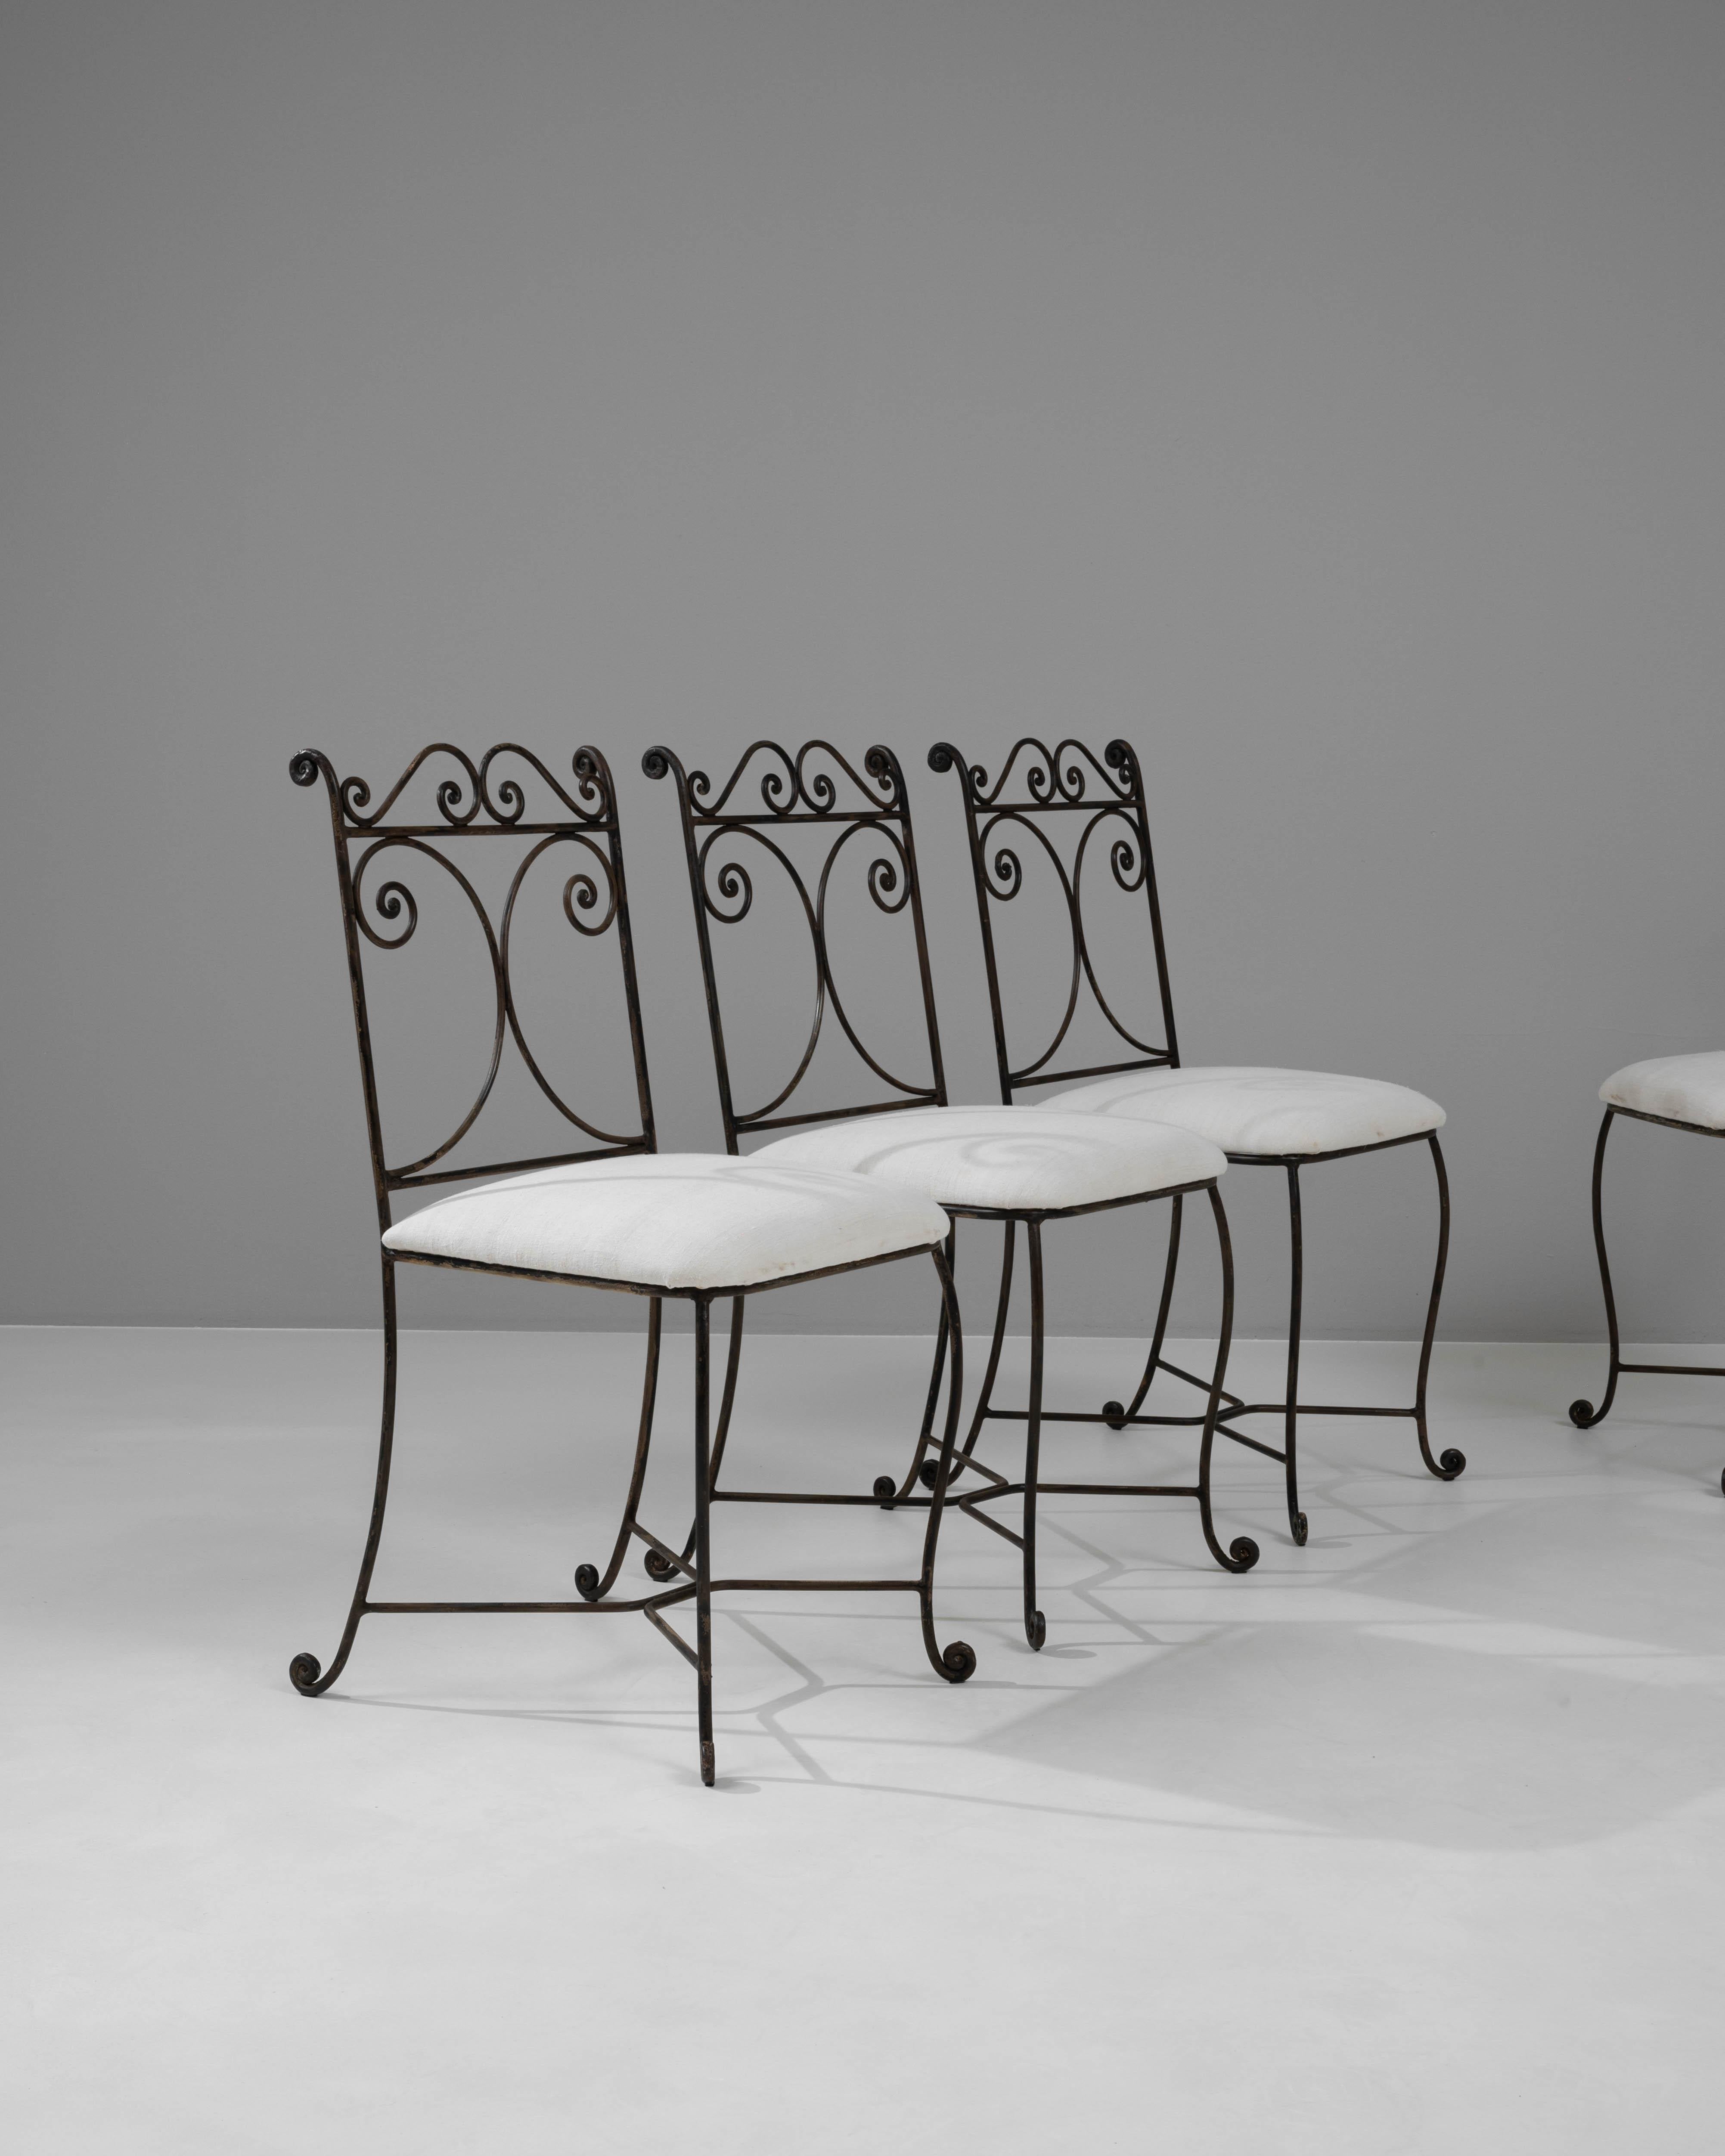 20th Century French Metal Chairs With Upholstered Seats, Set of 4 For Sale 2